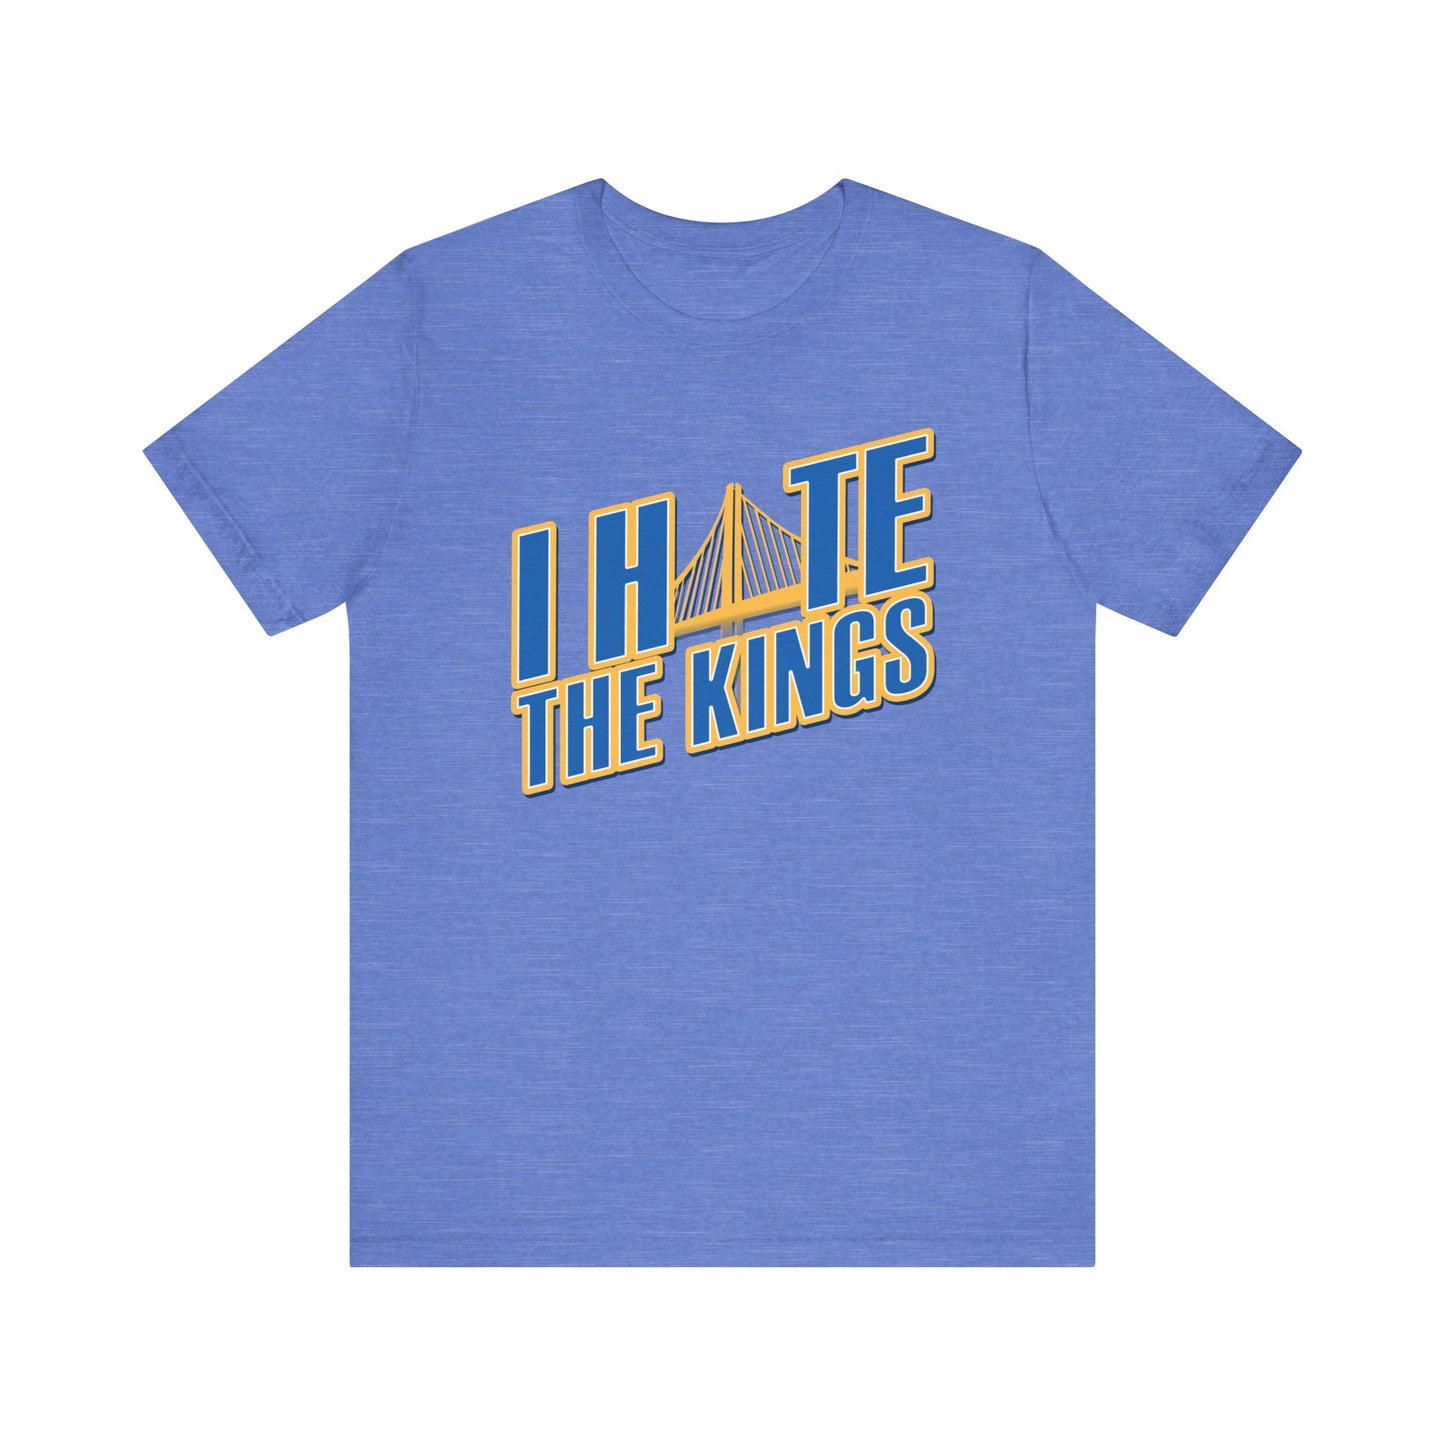 I Hate The Keengs (for Golden State fans) - Unisex Jersey Short Sleeve Tee